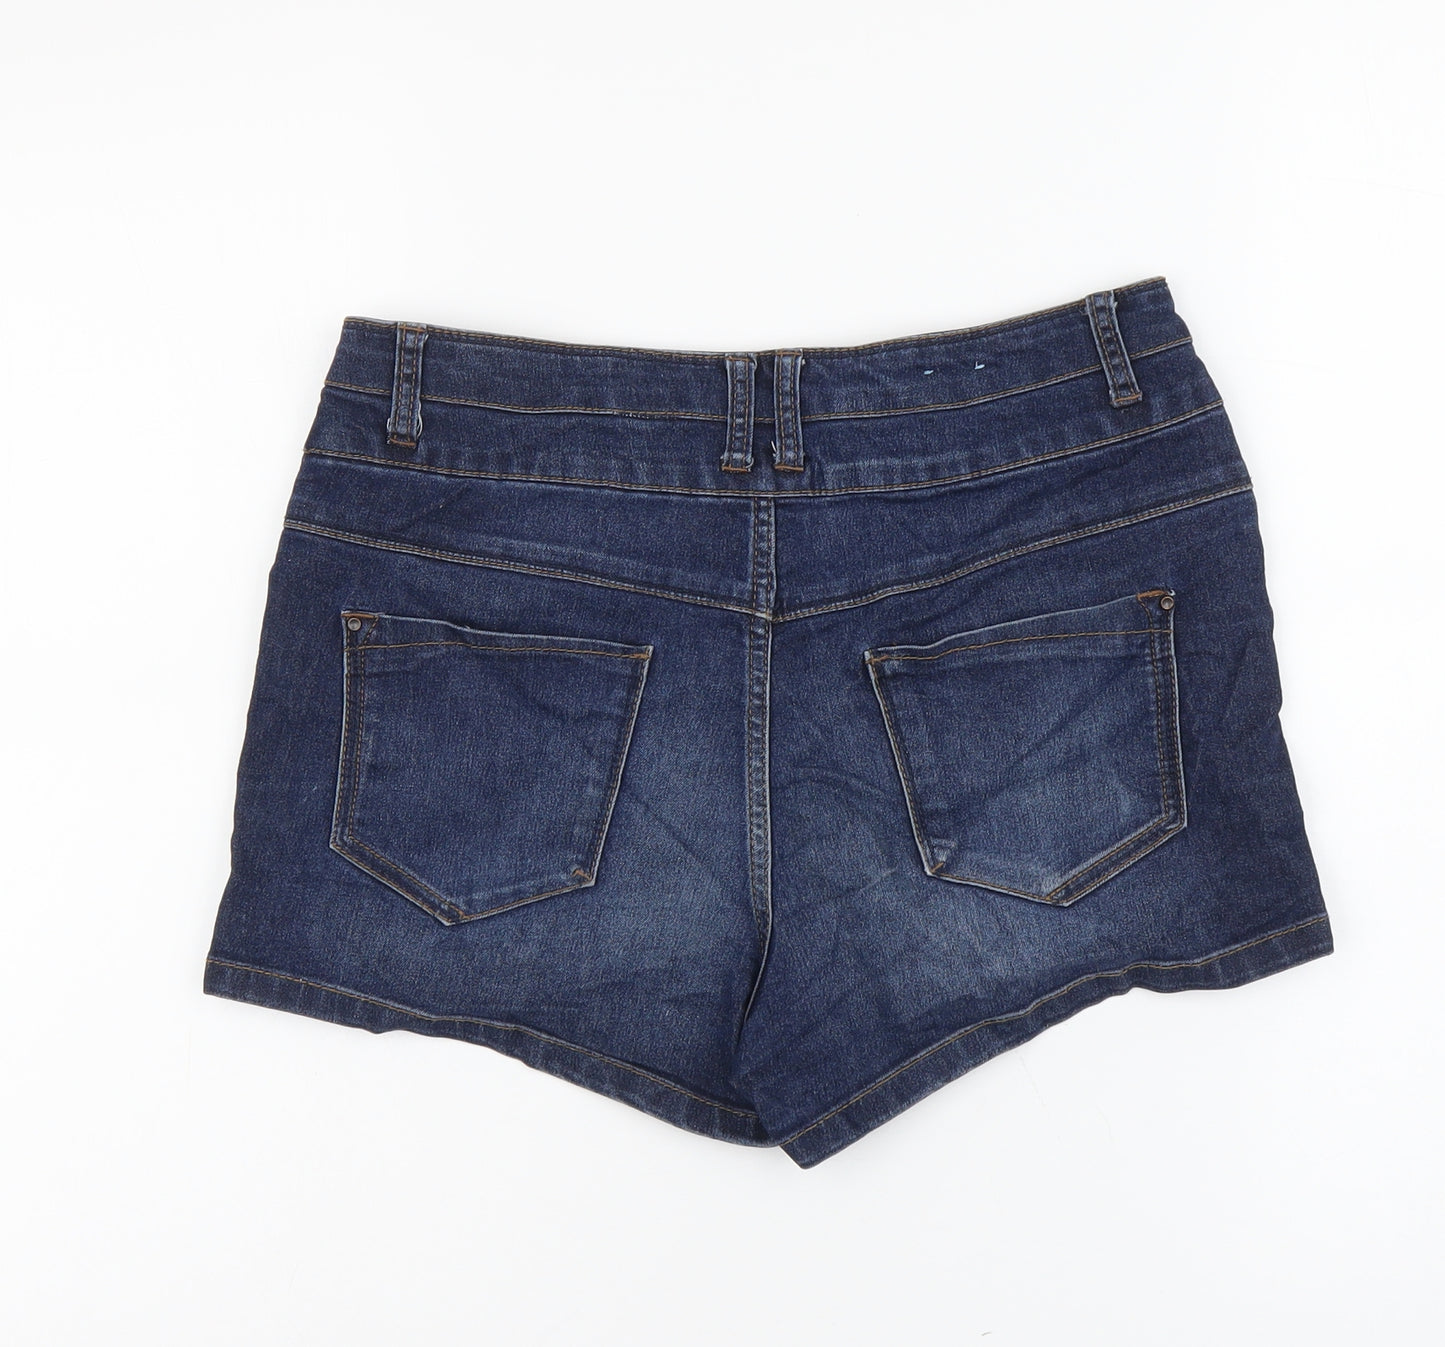 YesYes Womens Blue Cotton Hot Pants Shorts Size 12 L3 in Regular Button